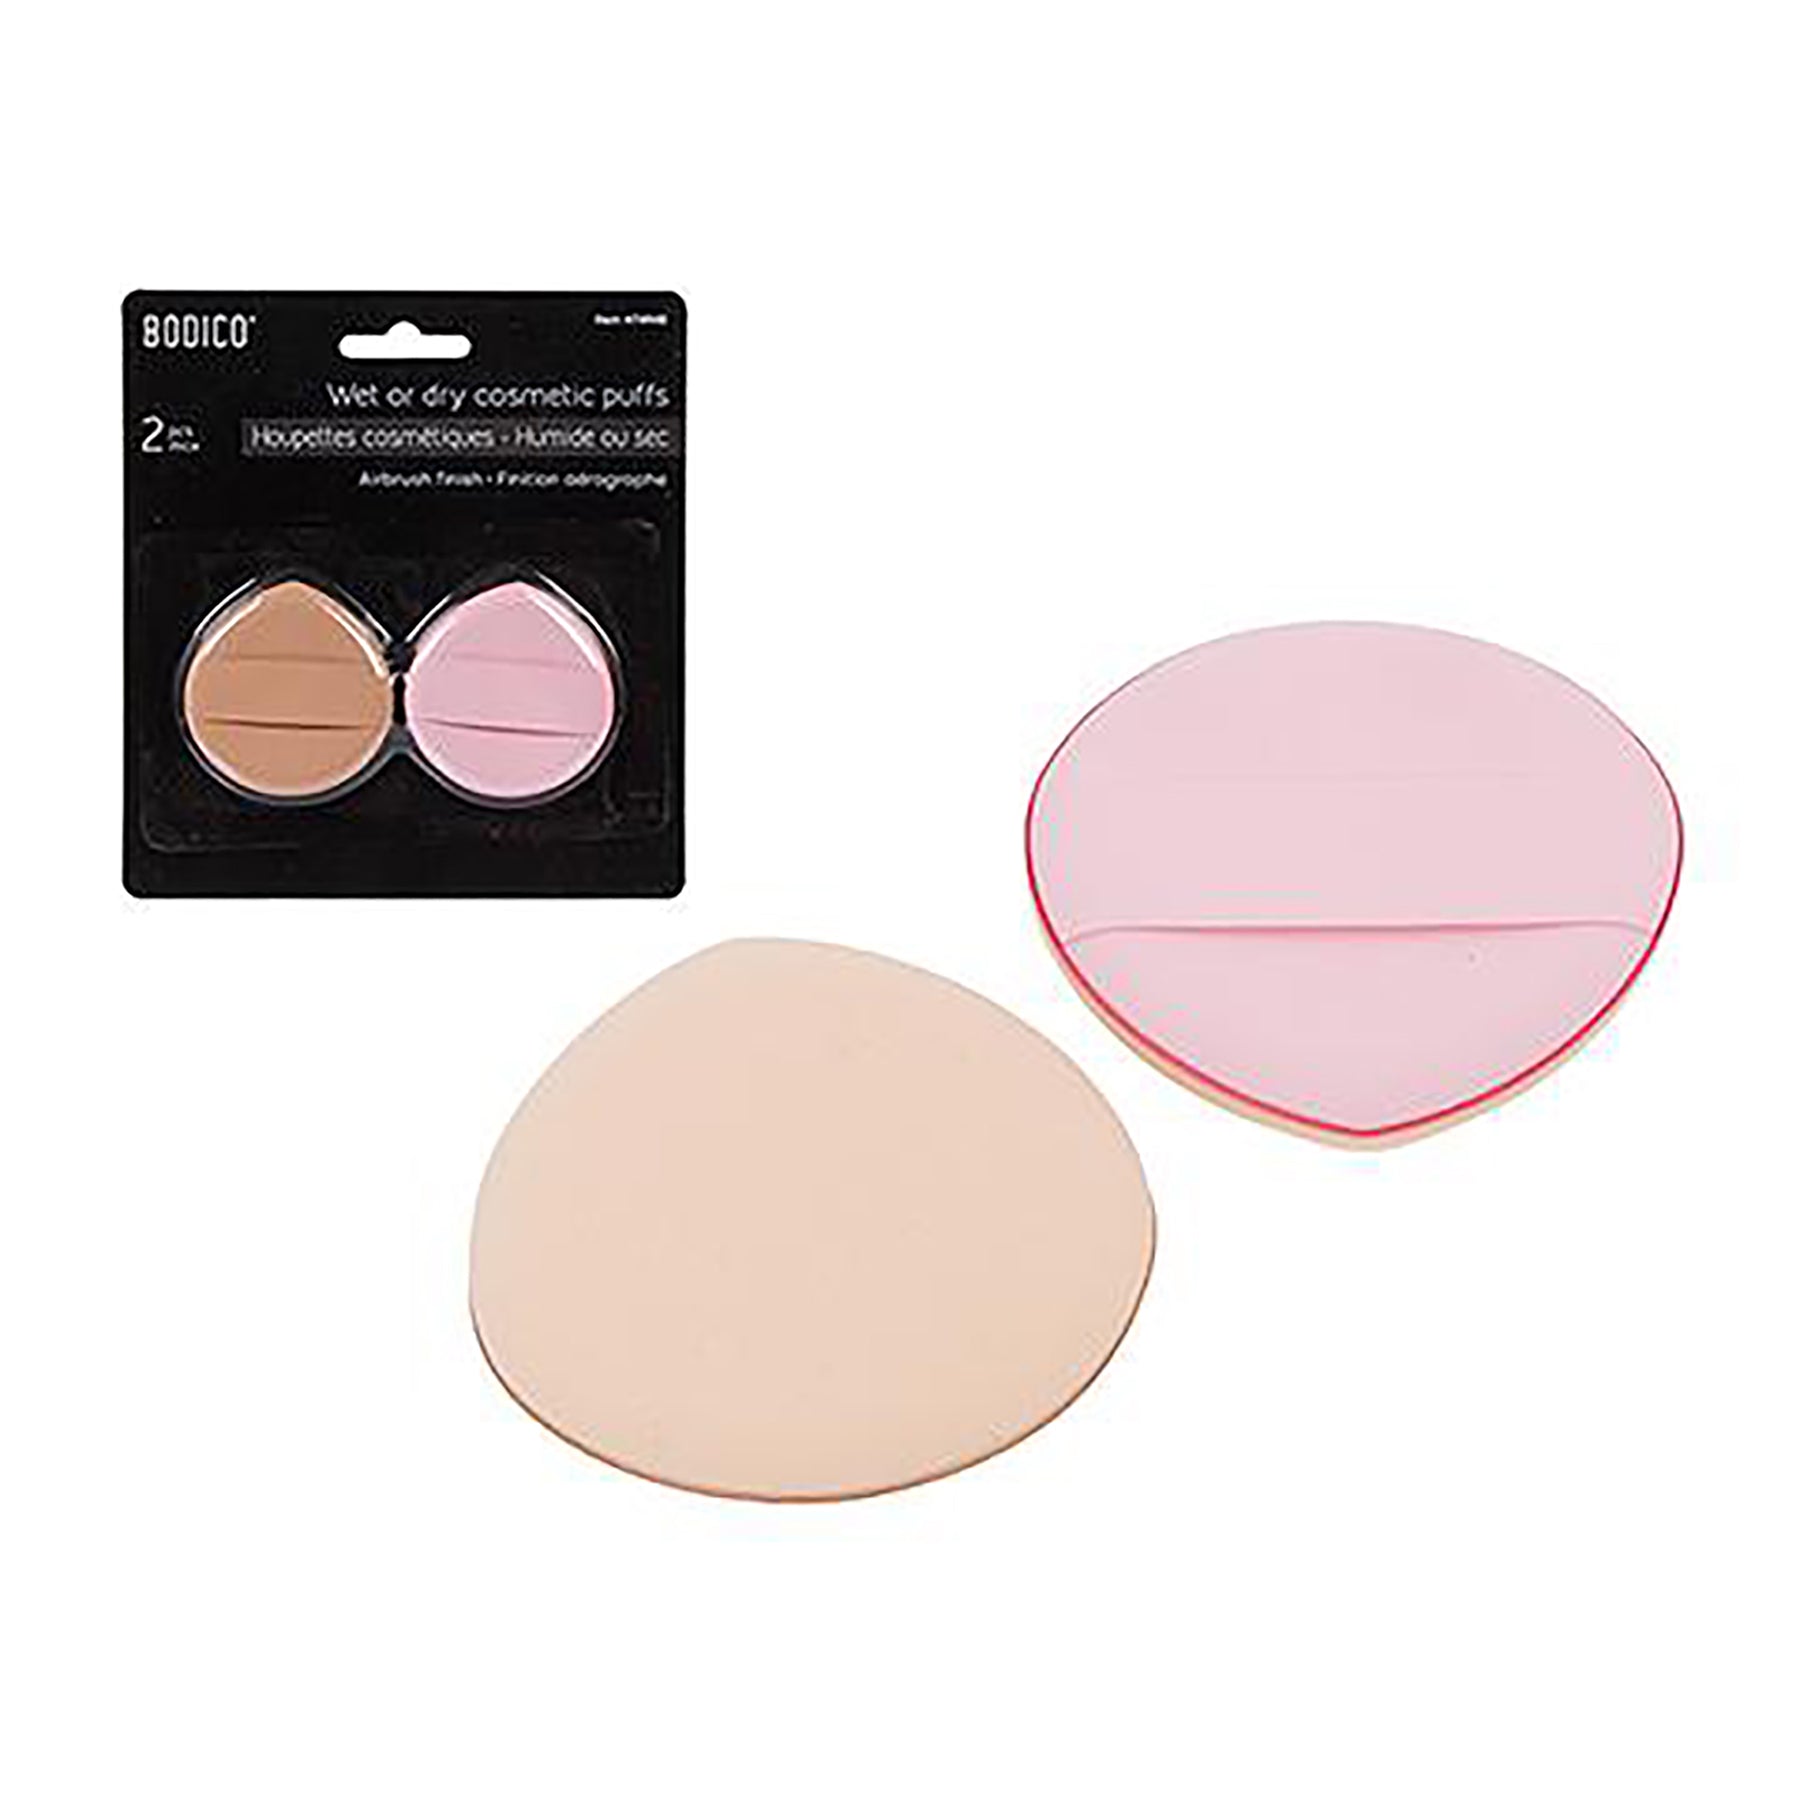 Bodico 2 Cosmetic Puff Sponges Wet or Dry 2x2in each